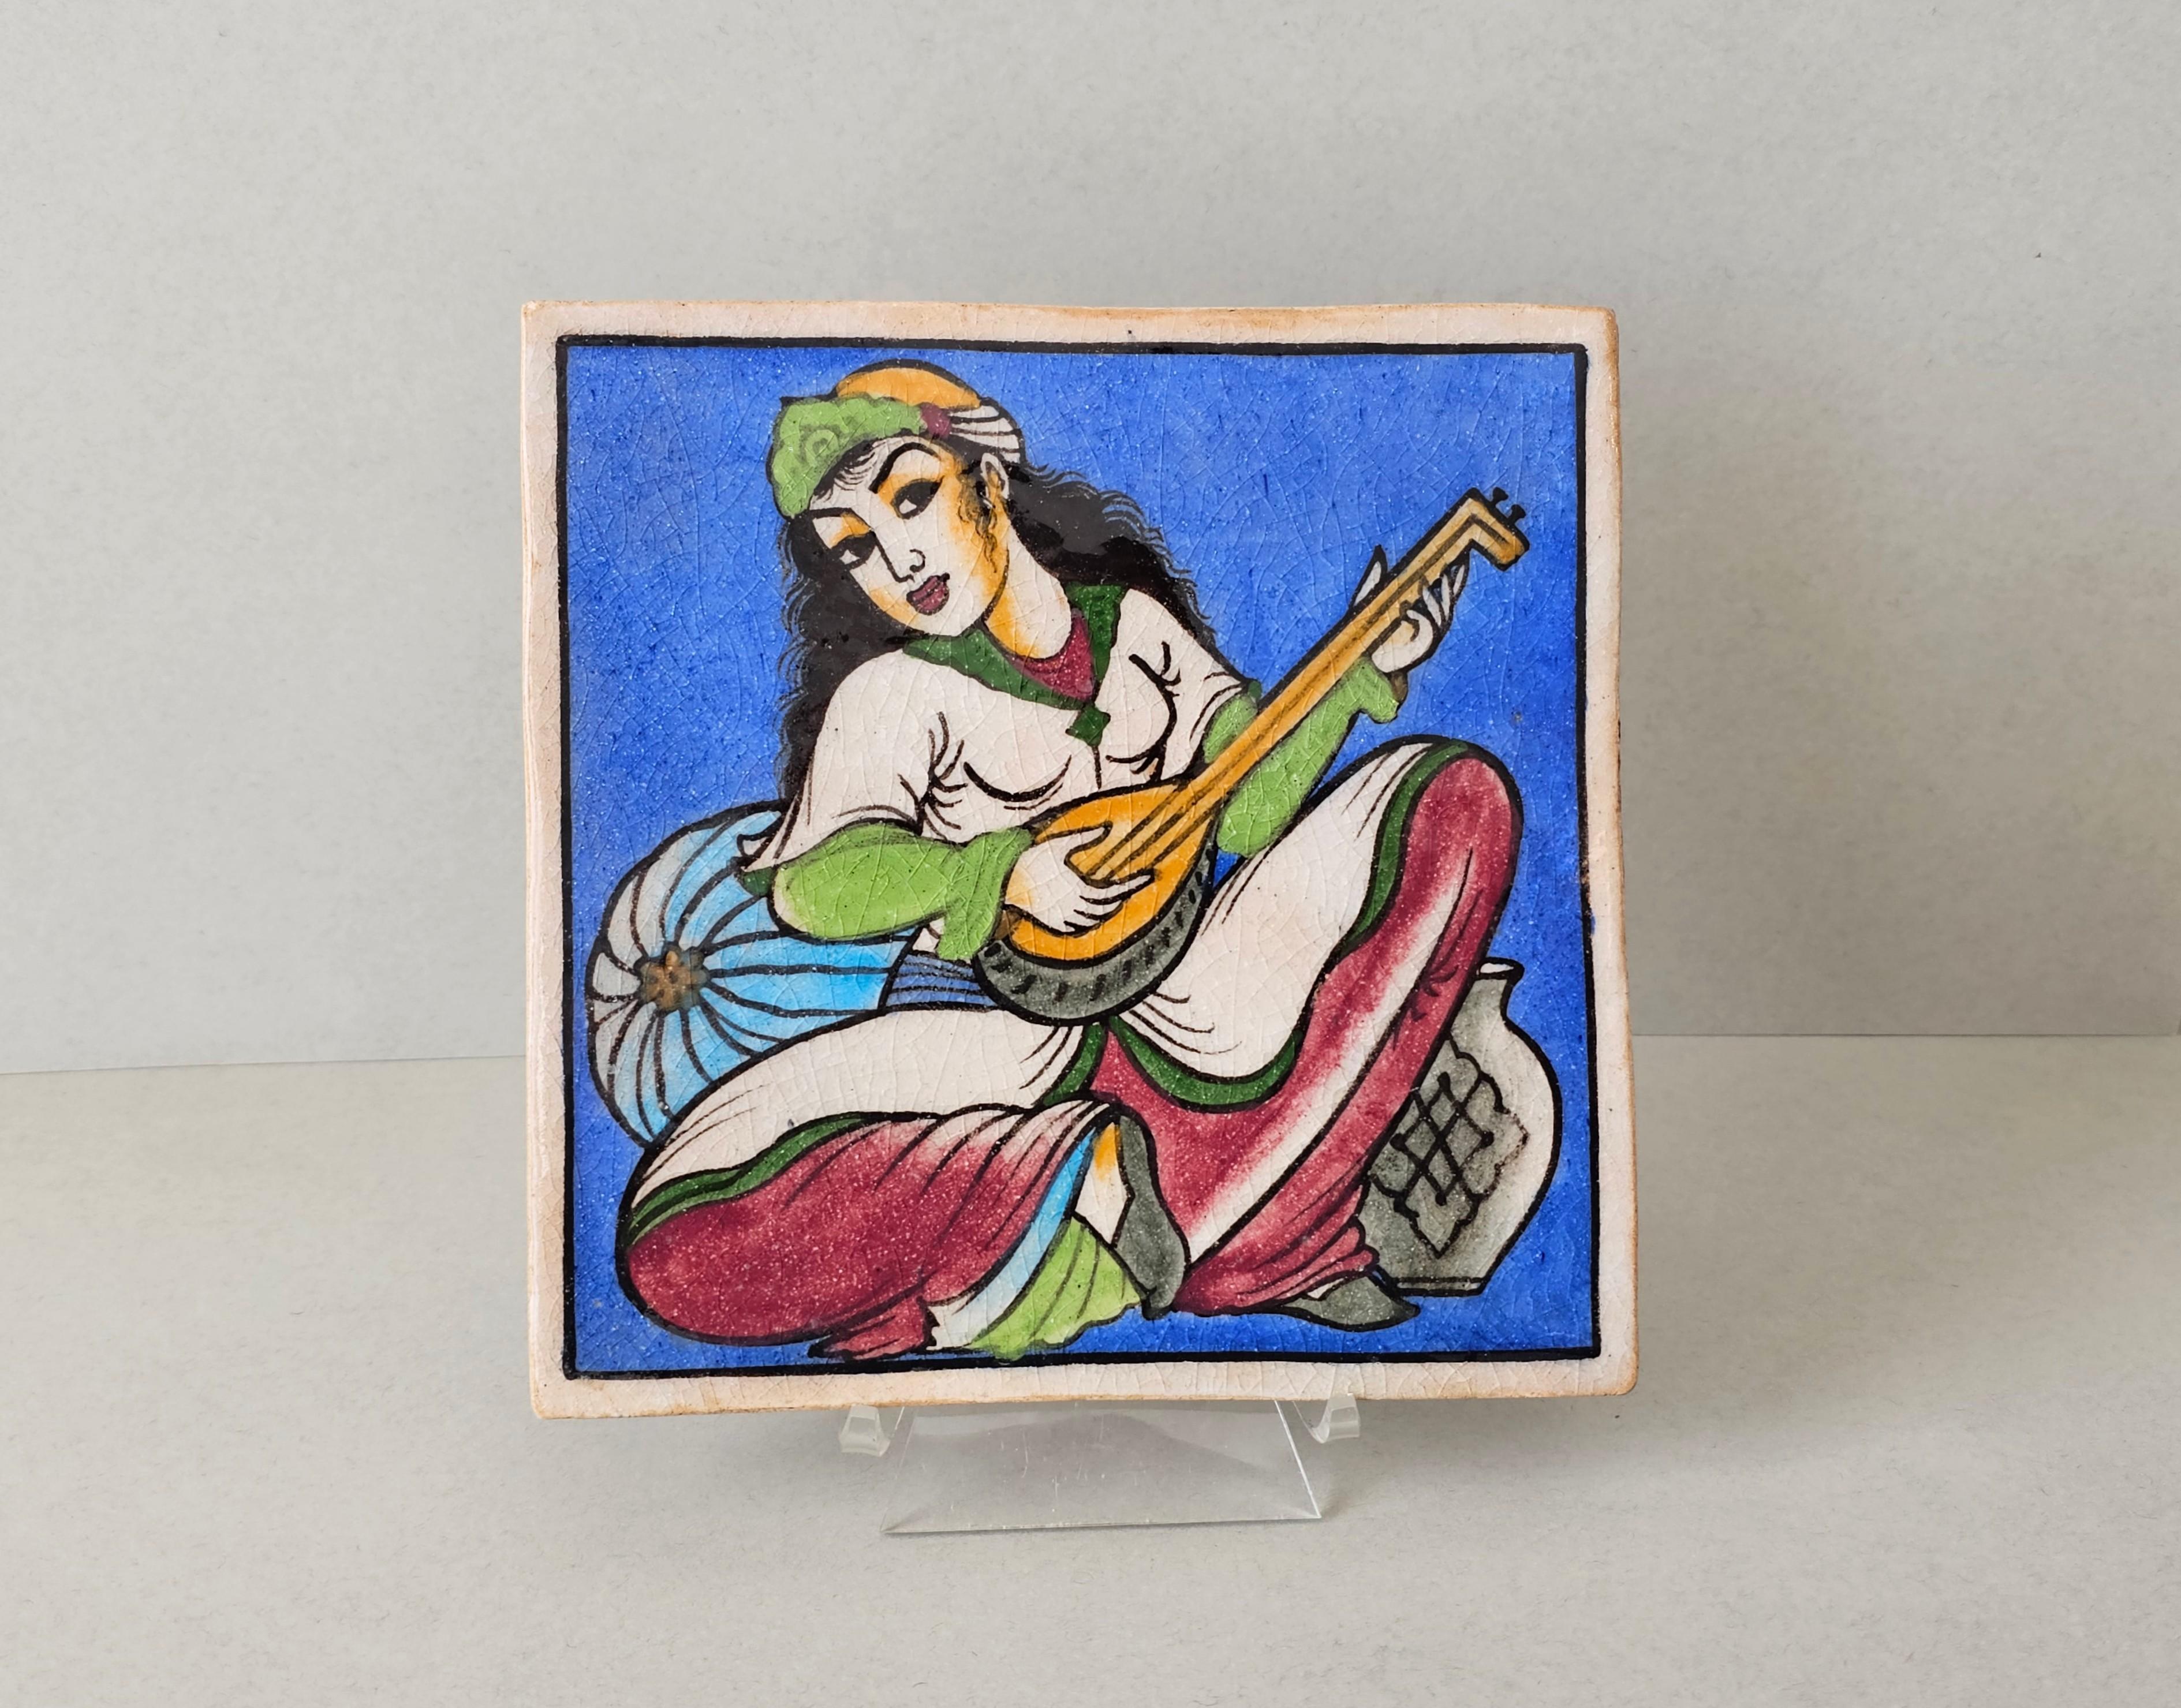 Exquisitely hand painted ceramic wall tile, Indo-Persian, late Qajar dynasty (1789-1925), exceptionally executed beautifully colored artwork depicting woman playing the oud.

Provenance:
From the estate of Margaret 